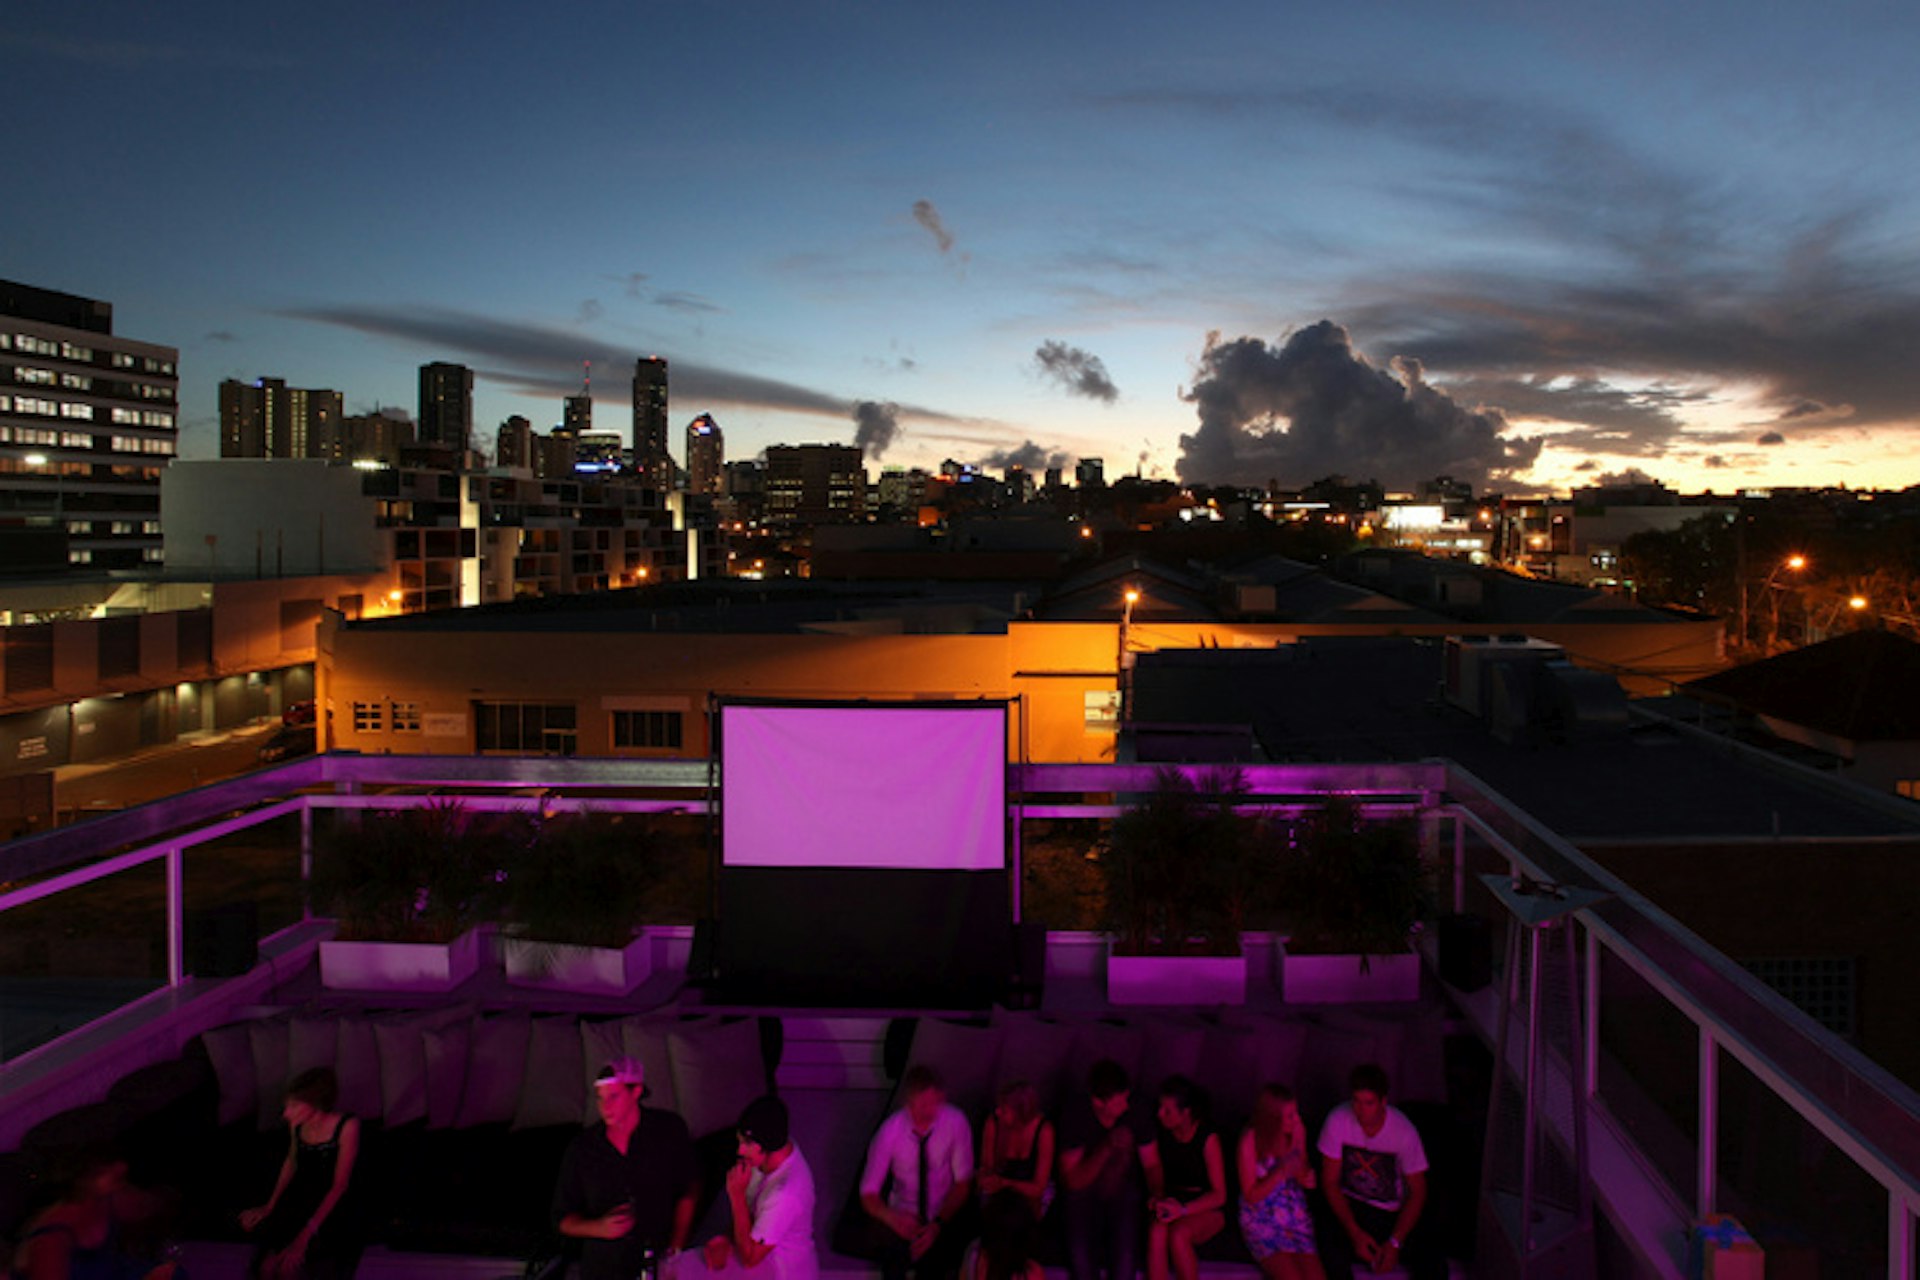 Catching the sunset from Limes Hotel Roof Bar terrace. Image by Richard Moross / CC BY 2.0 